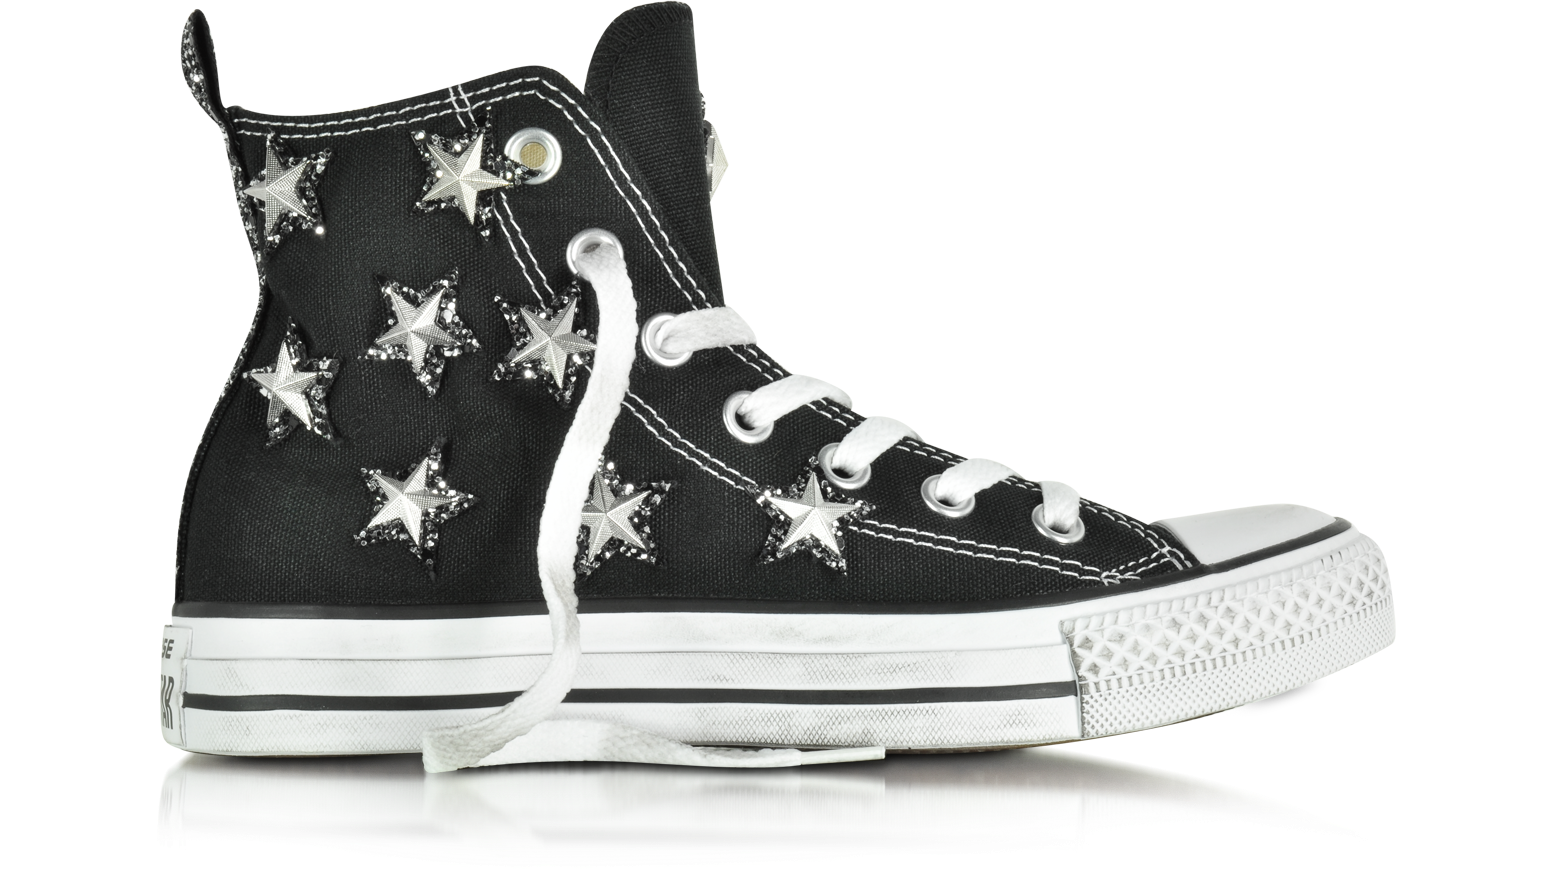 Converse Con Stelle Top Sellers, 50% OFF | lagence.tv ملينات